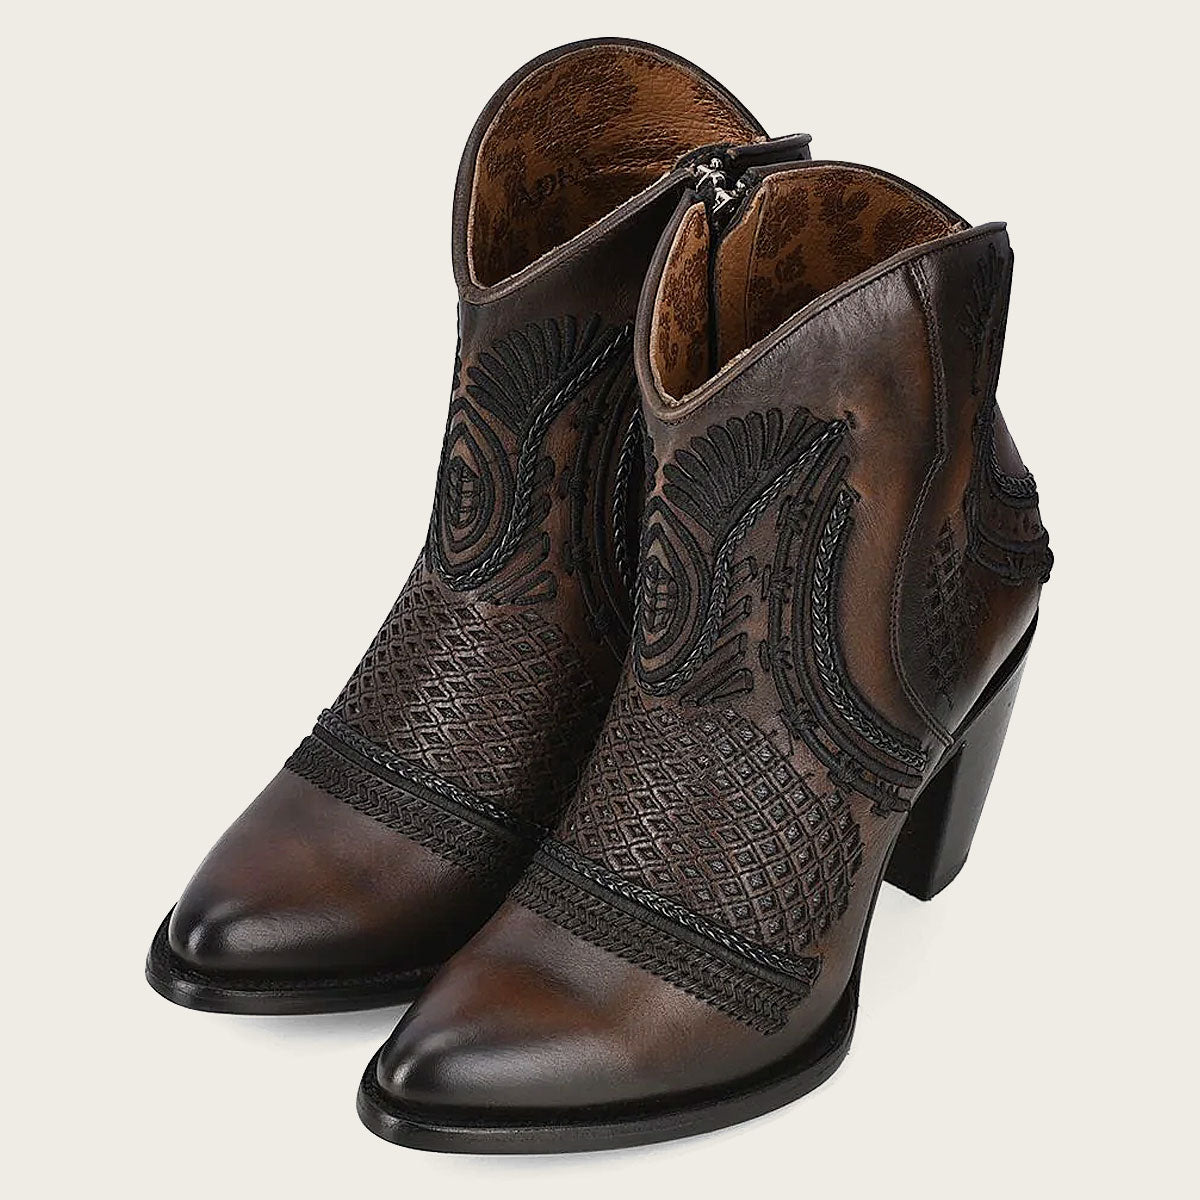 The shaded finish enhances the overall aesthetic of the boots, making them perfect for any occasion.